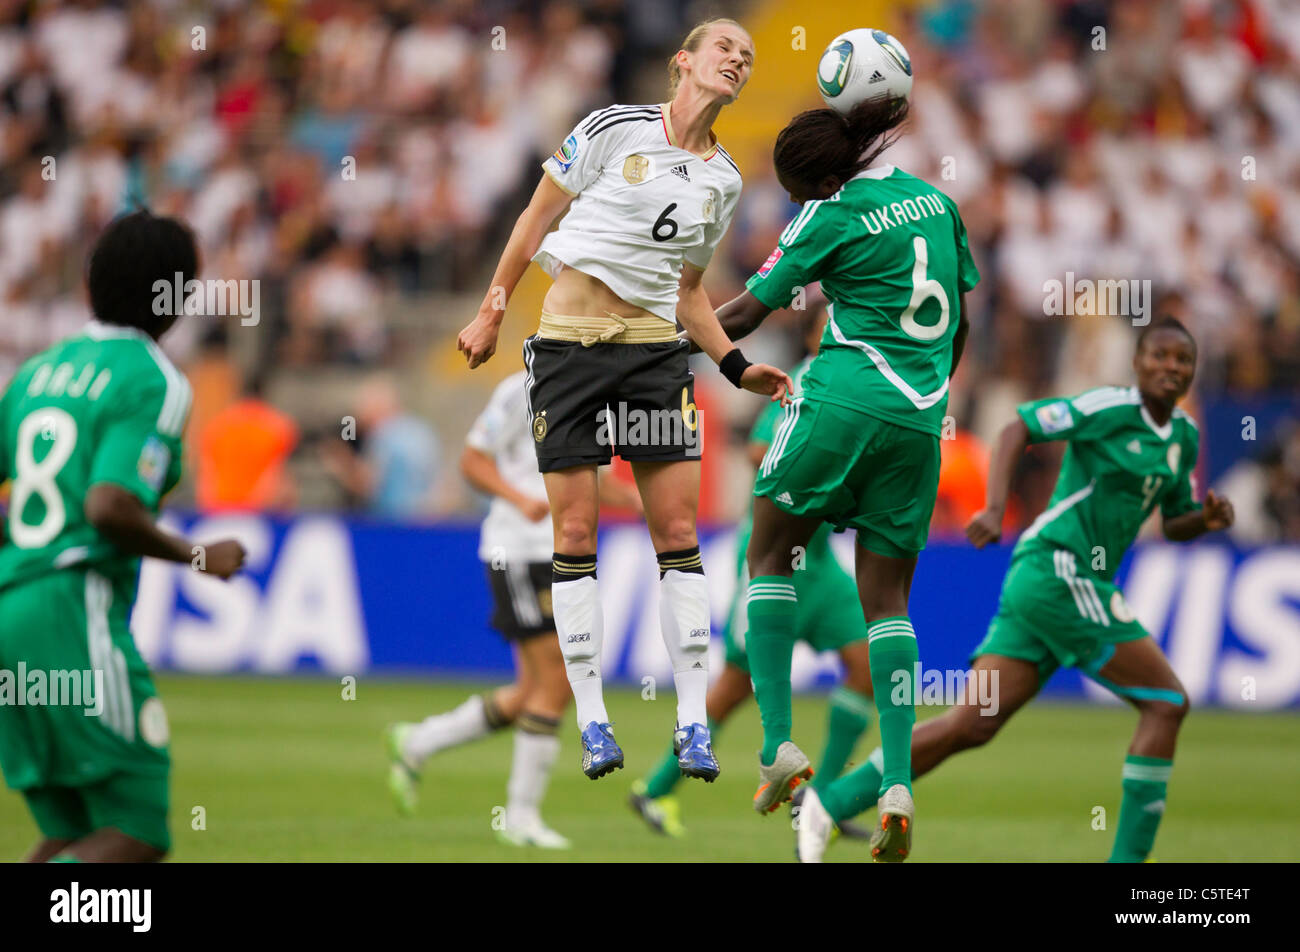 Simone Laudehr of Germany (l) and Helen Ukaonu of Nigeria (r) battle for a header during a 2011 FIFA Women's World Cup match. Stock Photo